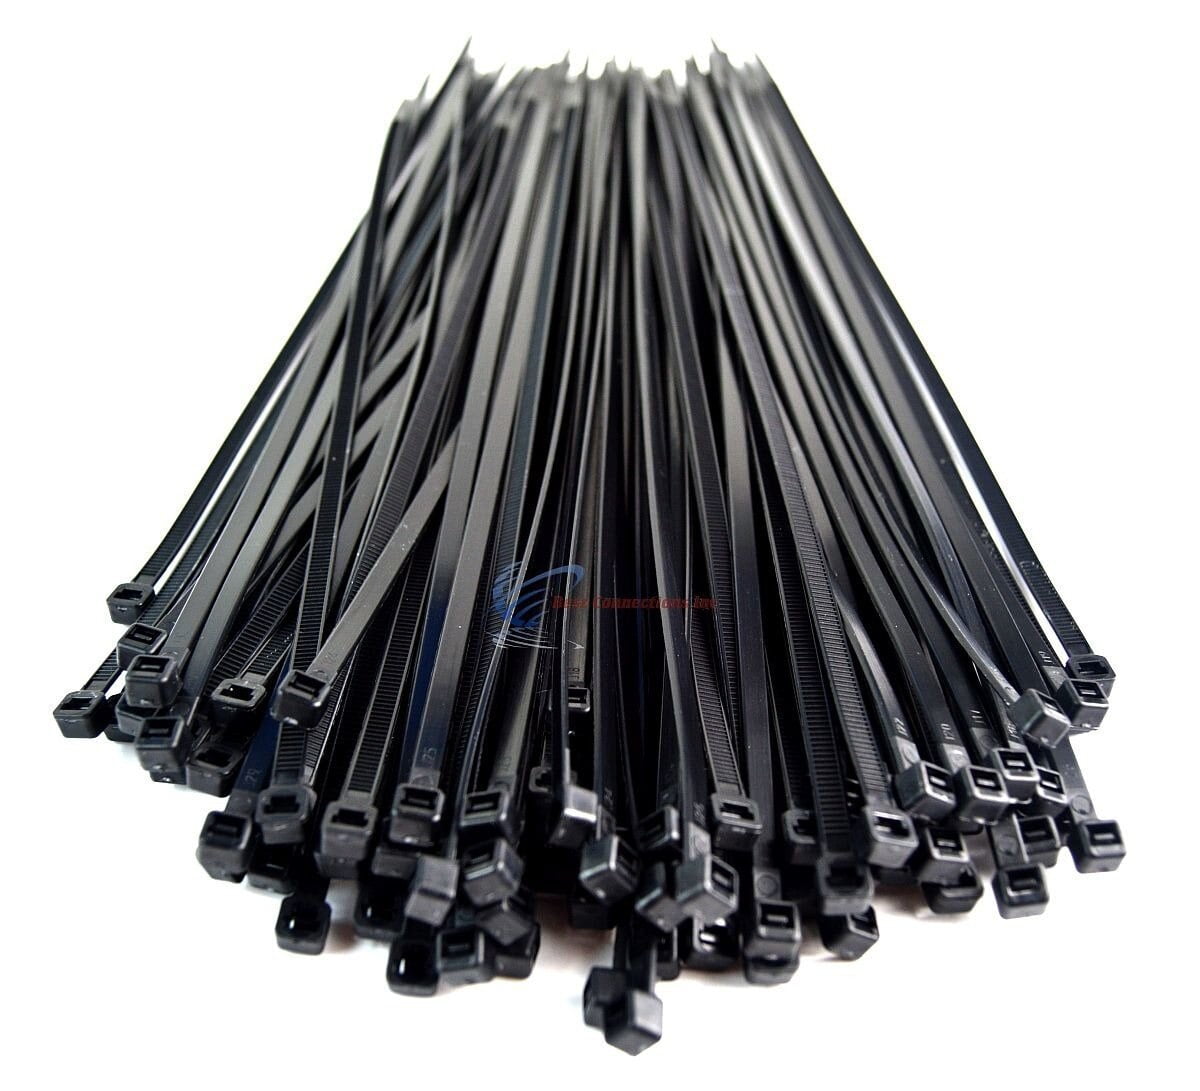 50 Bags of 100 5000 Pcs 4" Inch Nylon Black Cable Zip Ties Wire Straps 